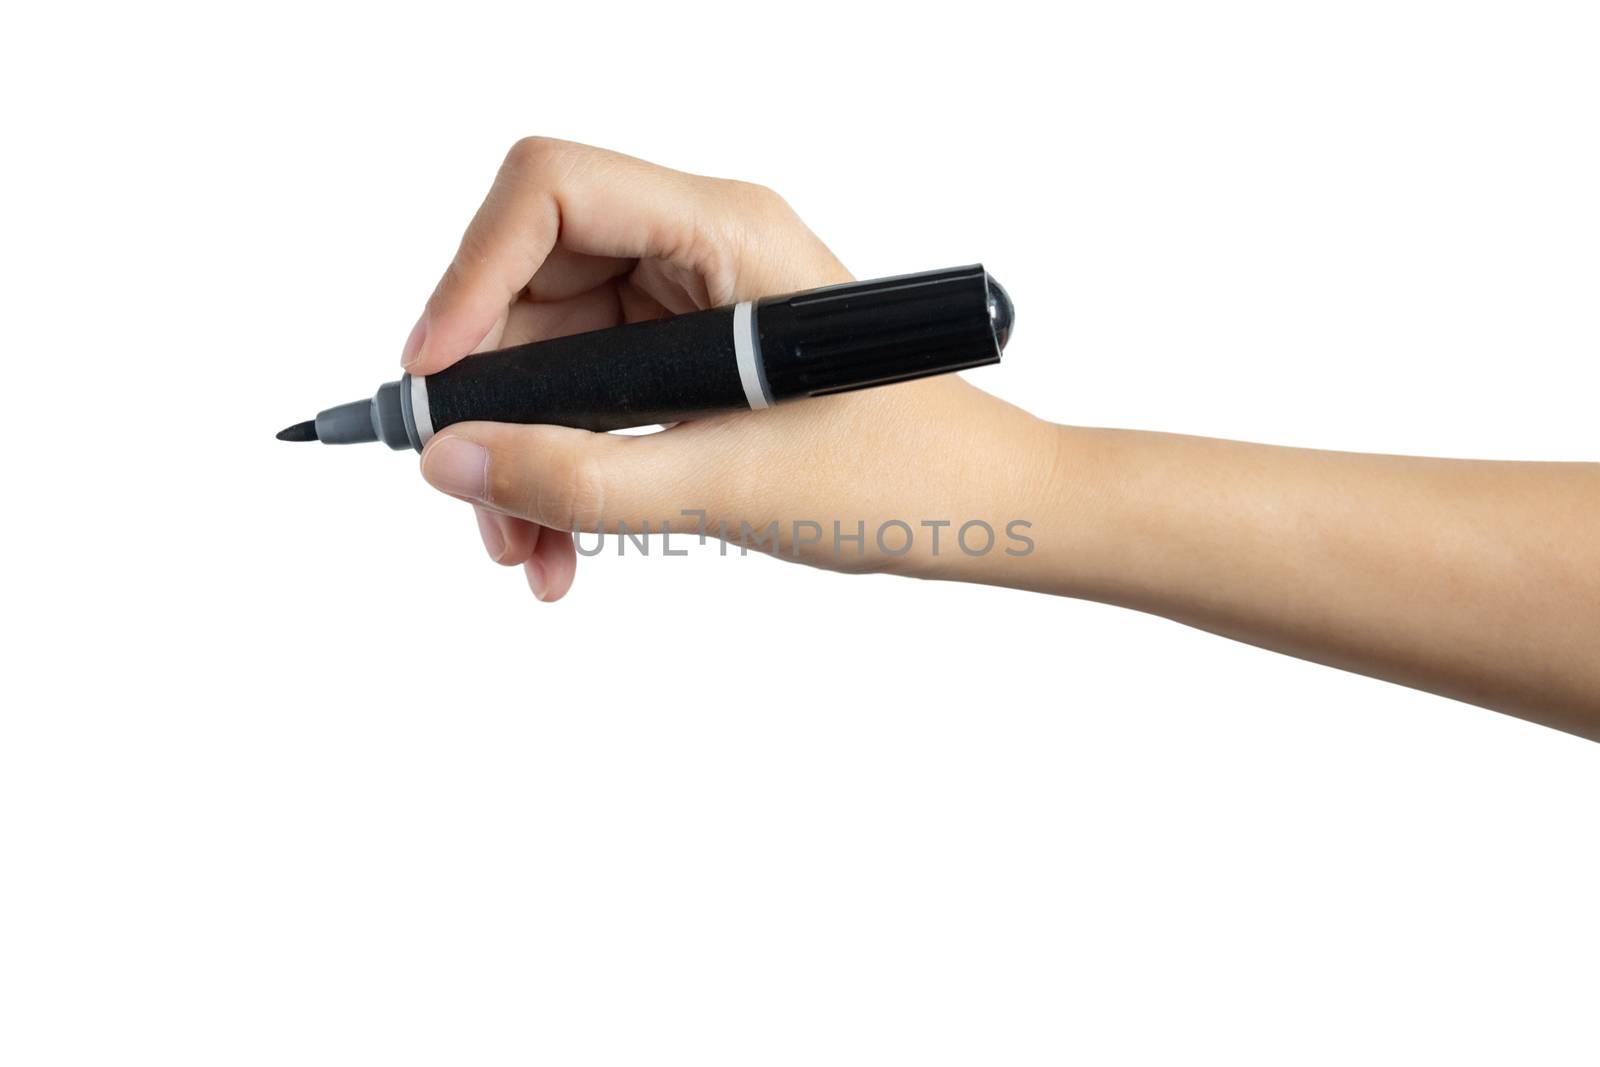 hand holding black magic marker pen ready to writing something isolated on white background with copy space, studio shot, side view by asiandelight